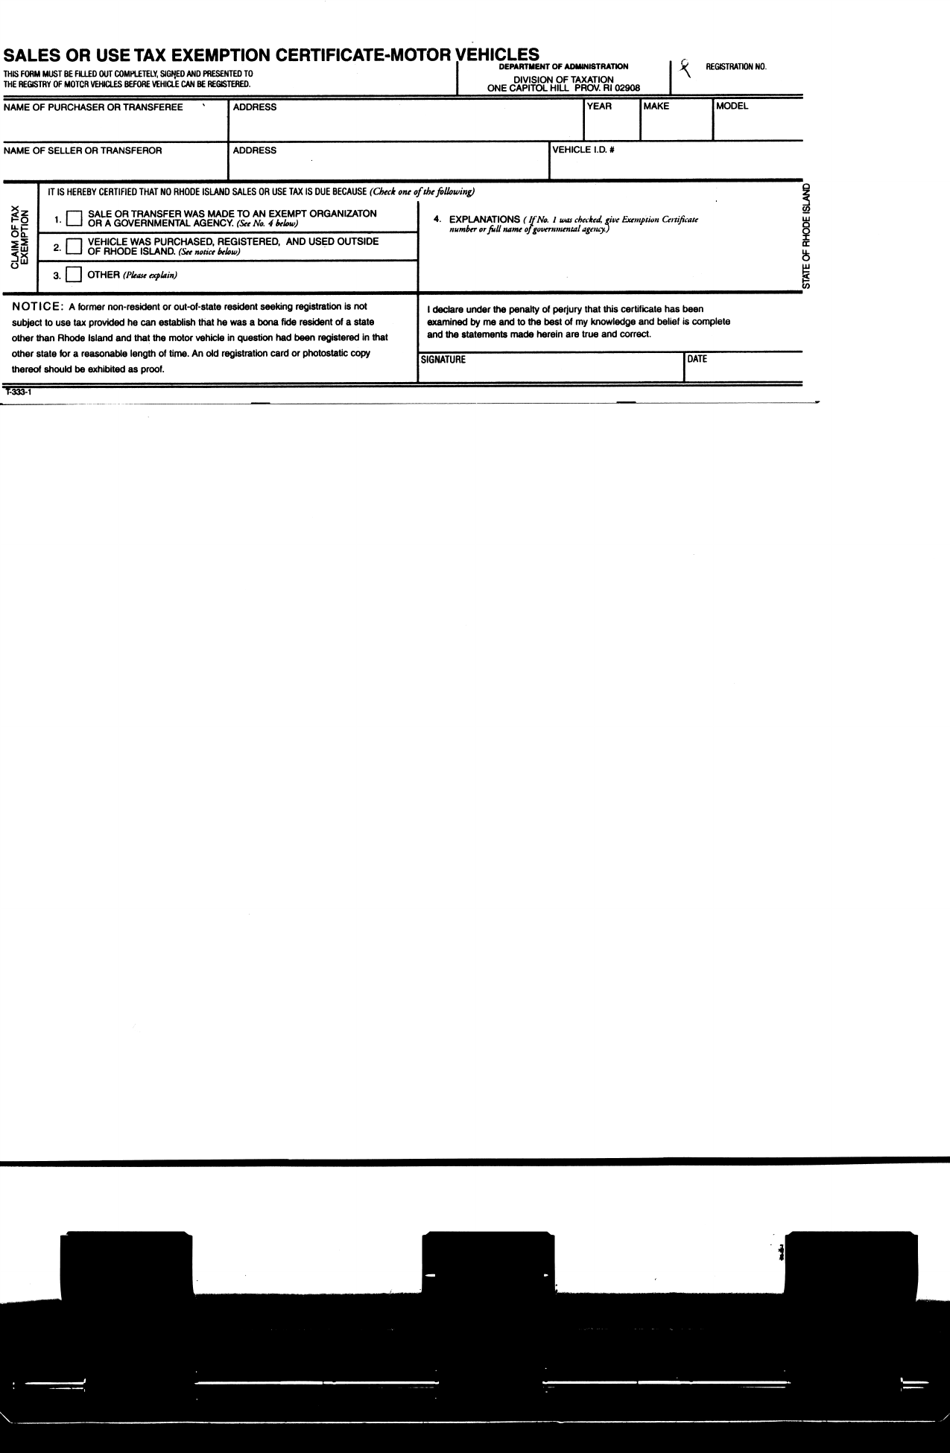 form-t-333-1-download-printable-pdf-or-fill-online-sales-or-use-tax